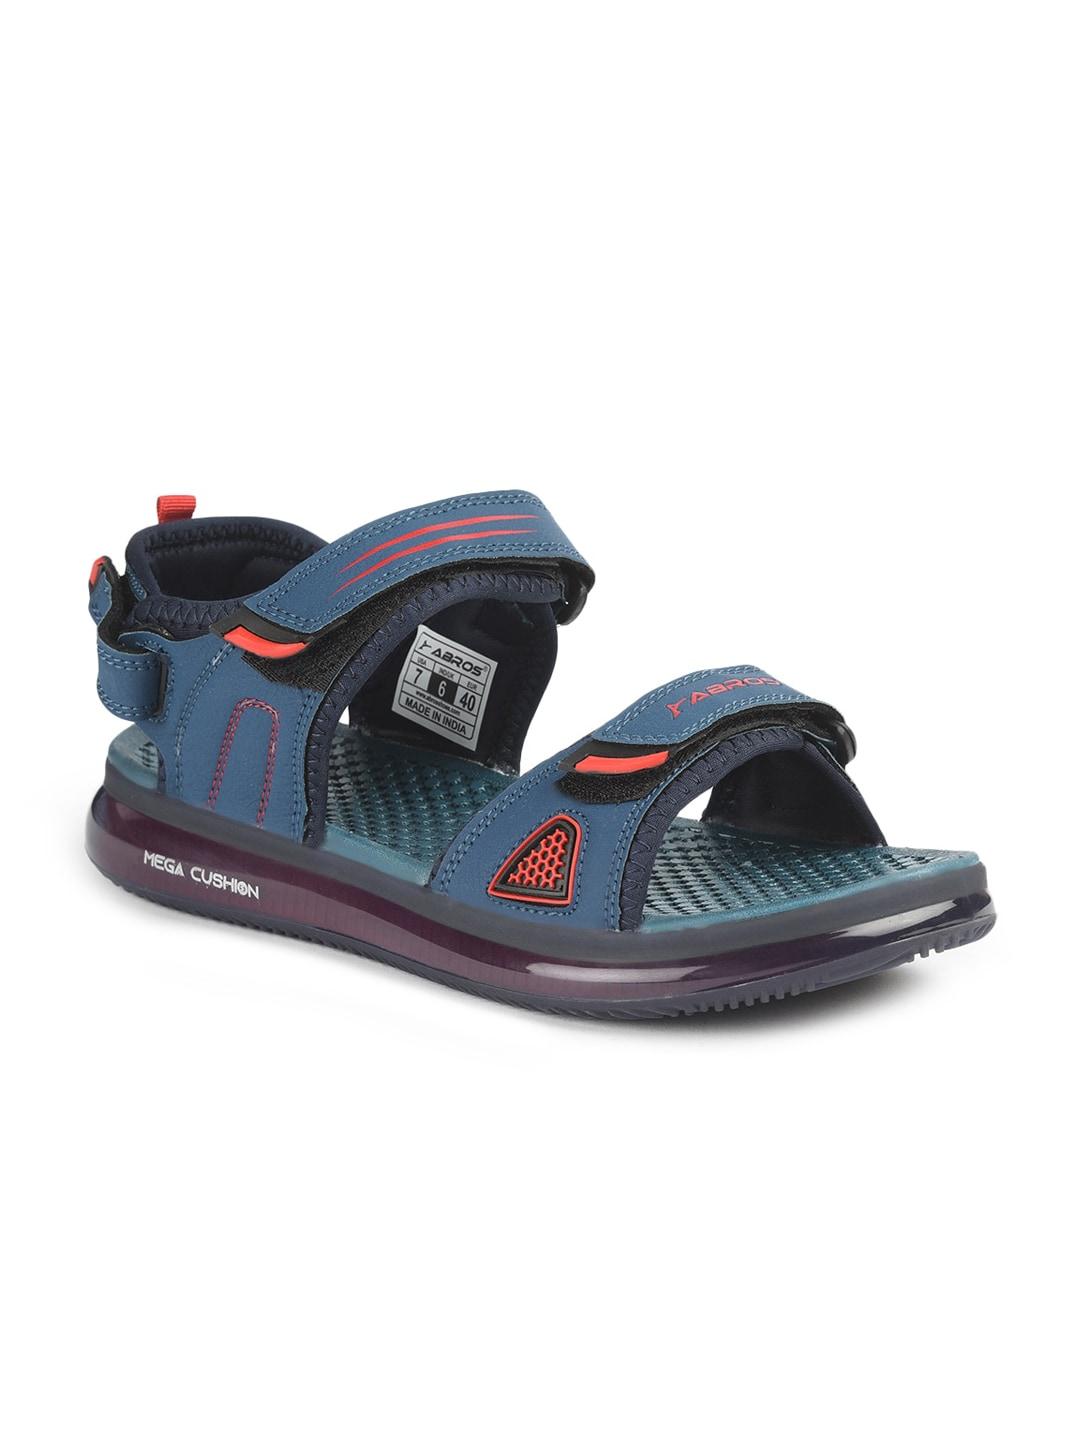 ABROS Men Teal Blue & Red Solid Sports Sandals